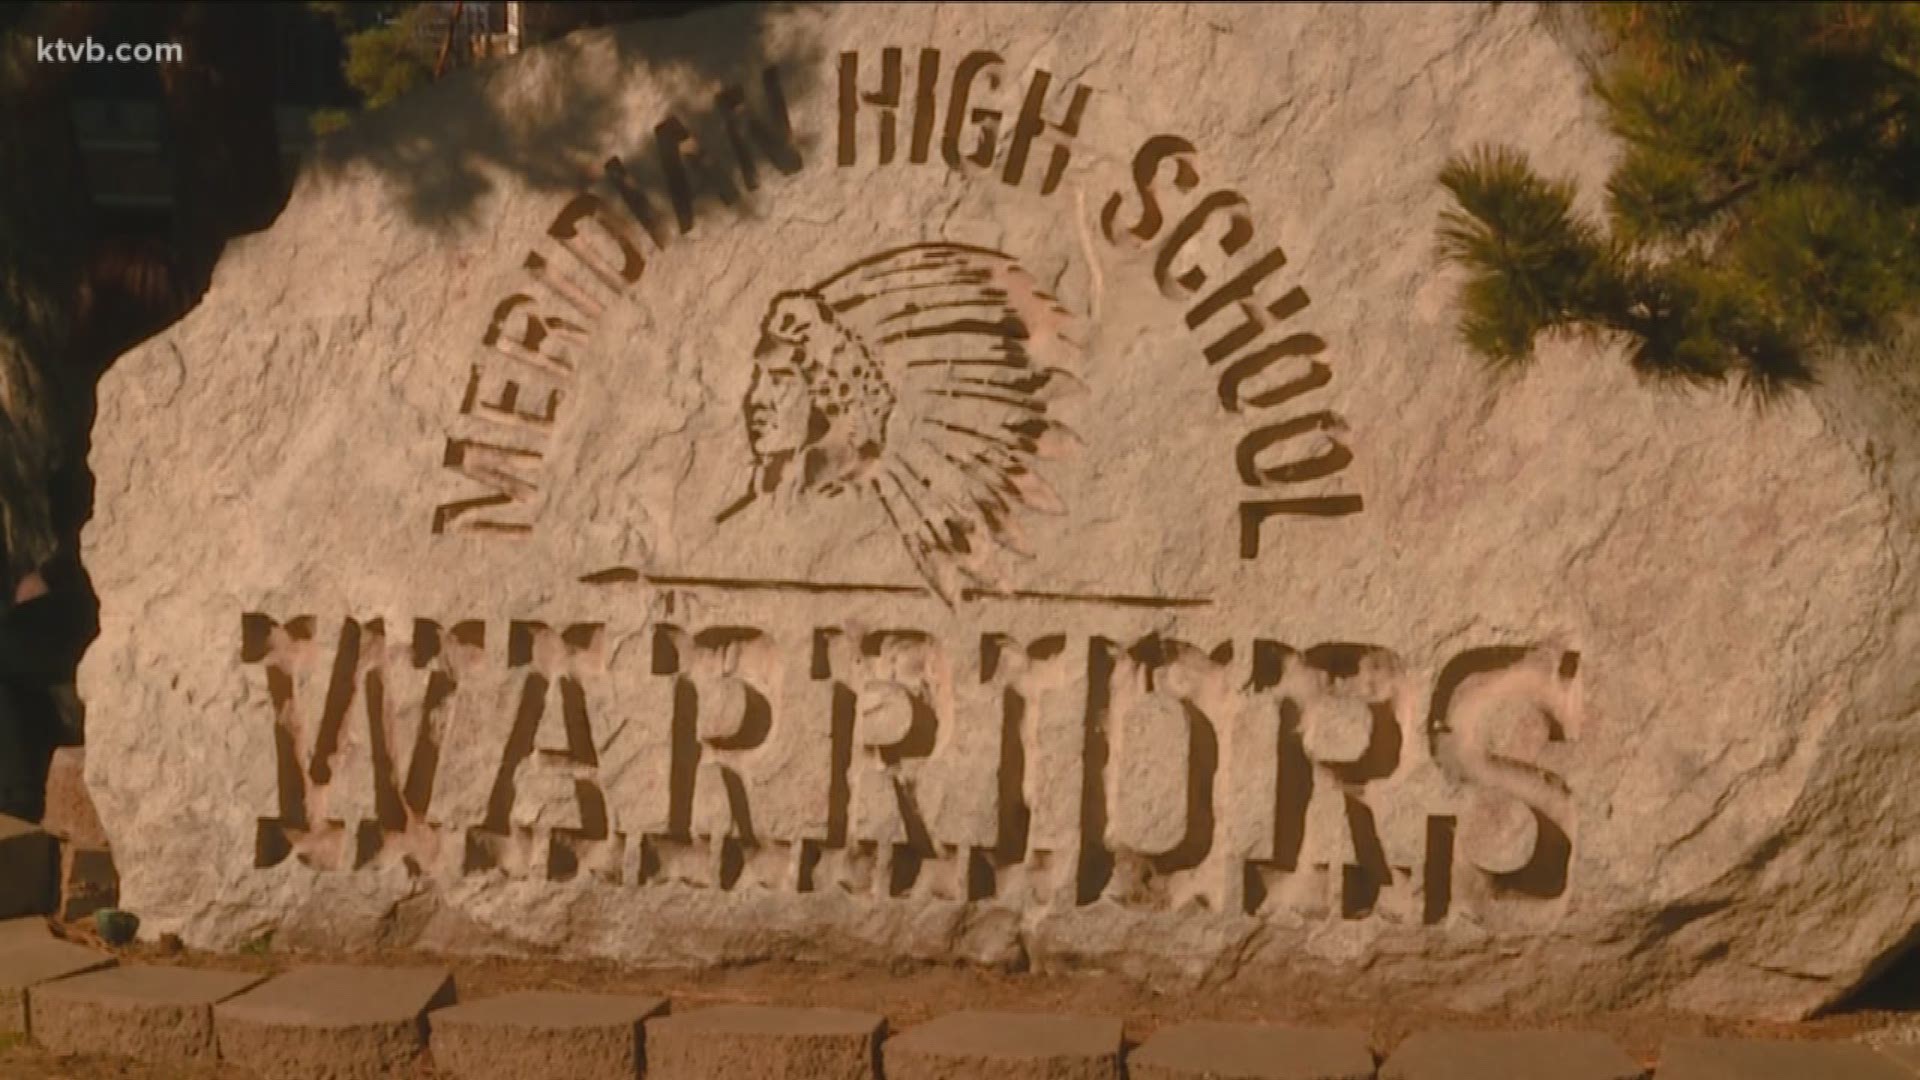 The school is starting to move away from using its Native American logo.